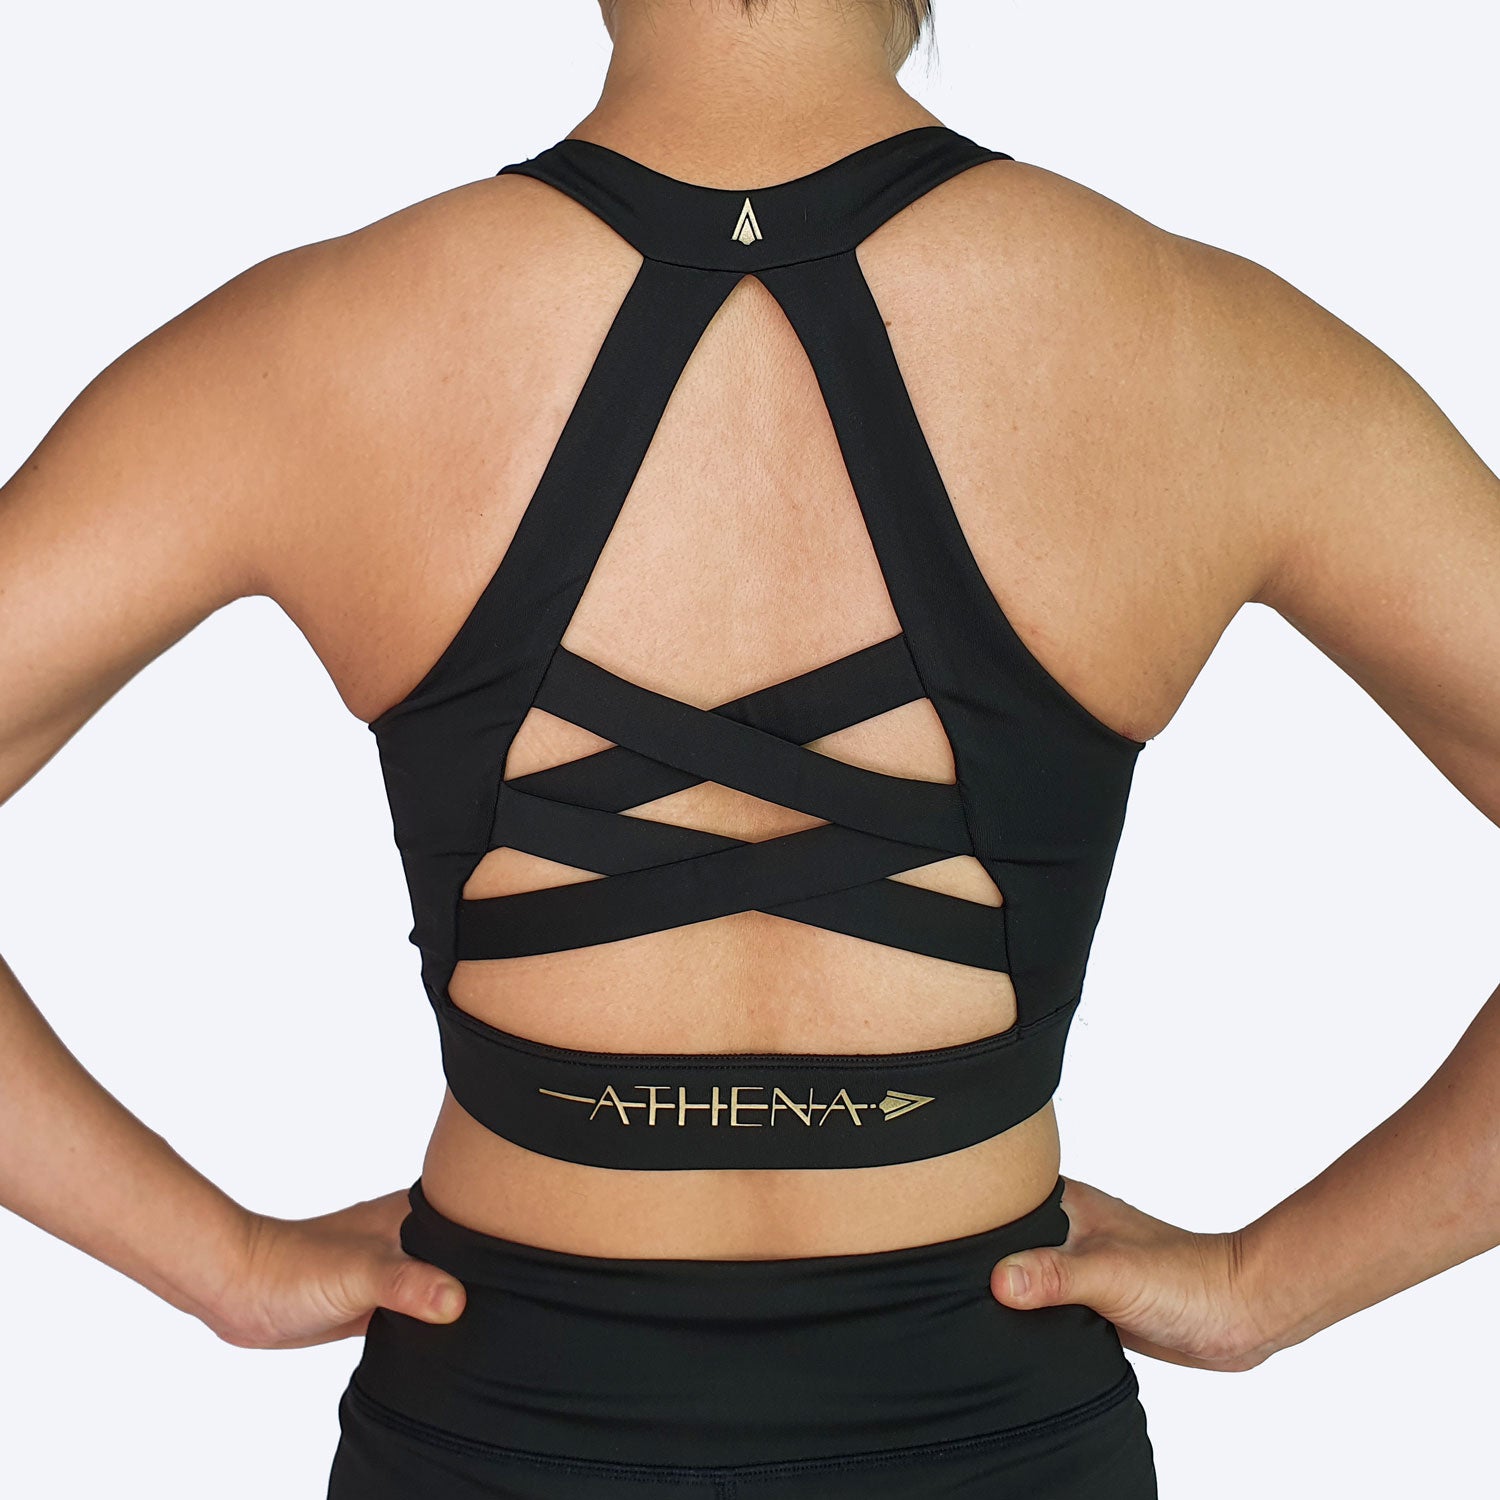 Athena 'Crop Style' Sports Bra (Black) - sports bra for kickboxing, muay  thai, boxing, mixed martial arts and other combat sports